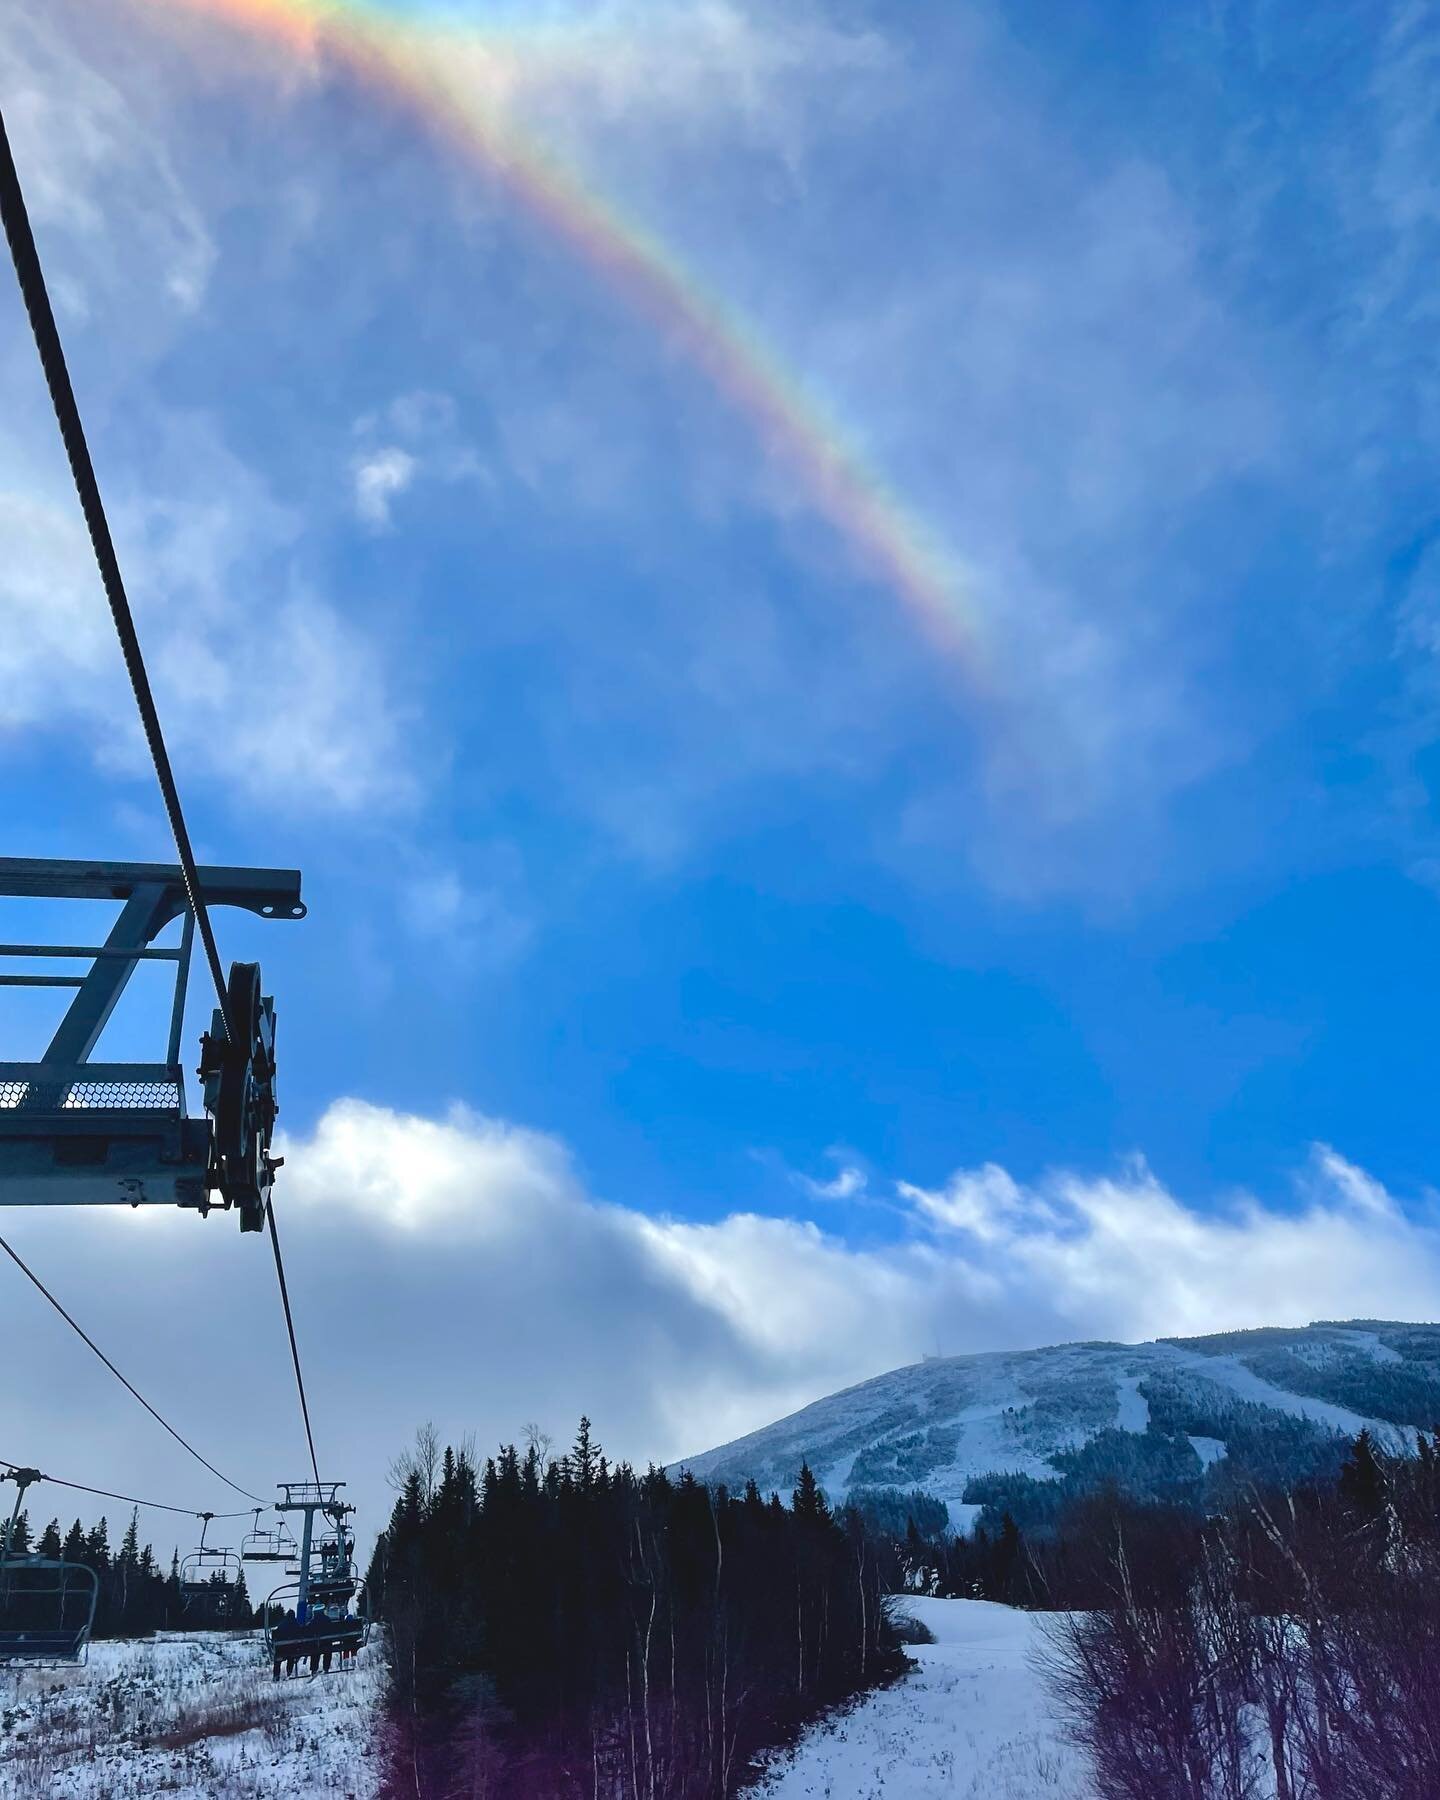 First trip up the mountain this morning at @sugarloafmountain was literally rainbows and blue skies! Doesn&rsquo;t get much better than this 🌈💙⛷❄️ 
.
.
.
#sugarloaf #lovemaine #skitheeast